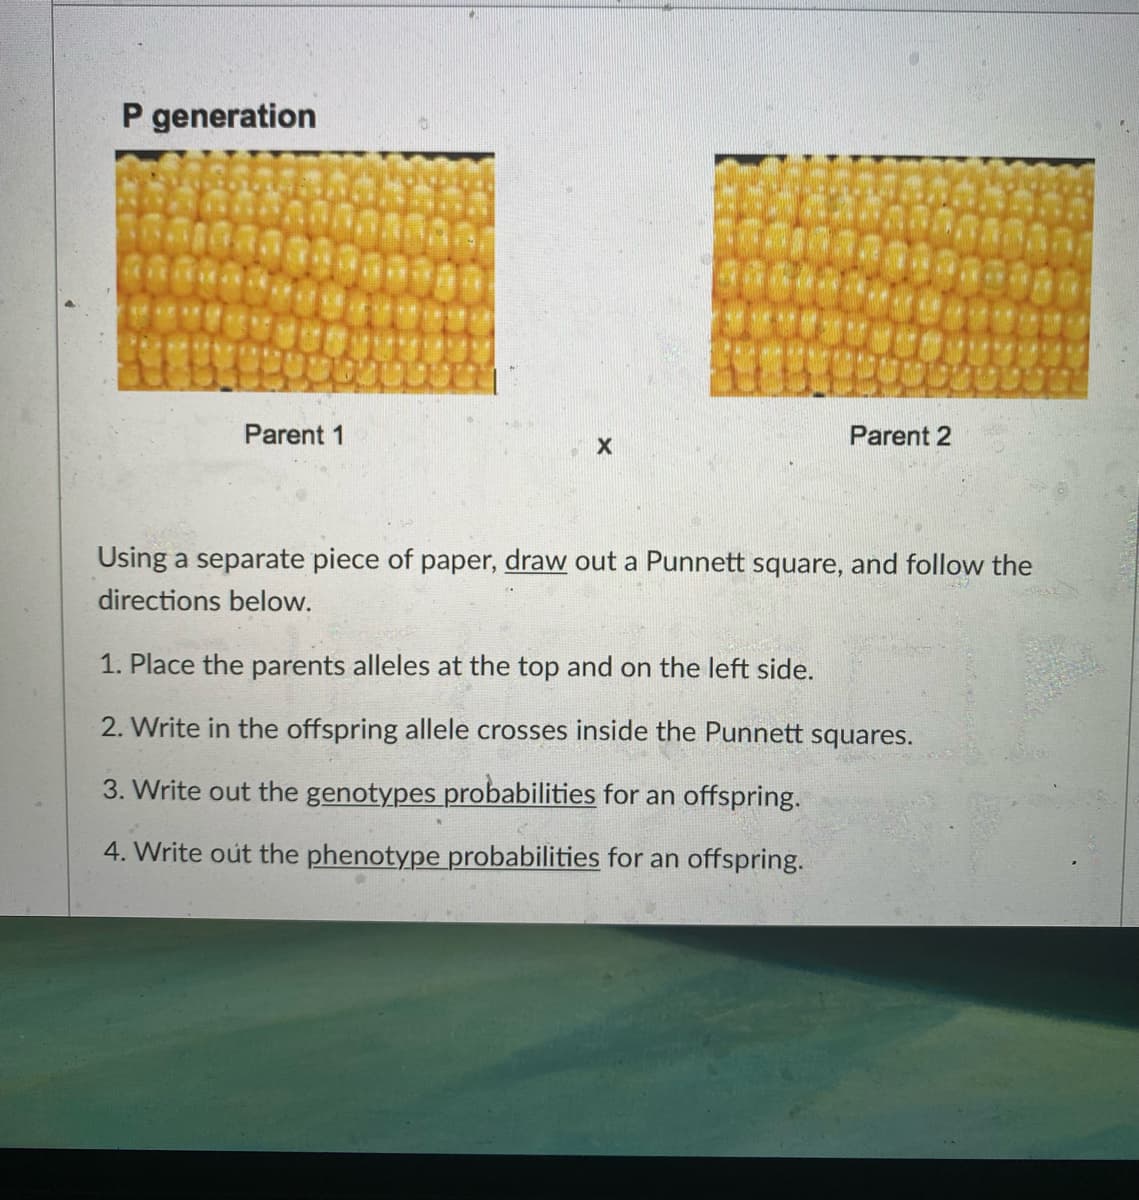 P generation
Parent 1
Parent 2
X
Using a separate piece of paper, draw out a Punnett square, and follow the
directions below.
1. Place the parents alleles at the top and on the left side.
2. Write in the offspring allele crosses inside the Punnett squares.
3. Write out the genotypes probabilities for an offspring.
4. Write out the phenotype probabilities for an offspring.